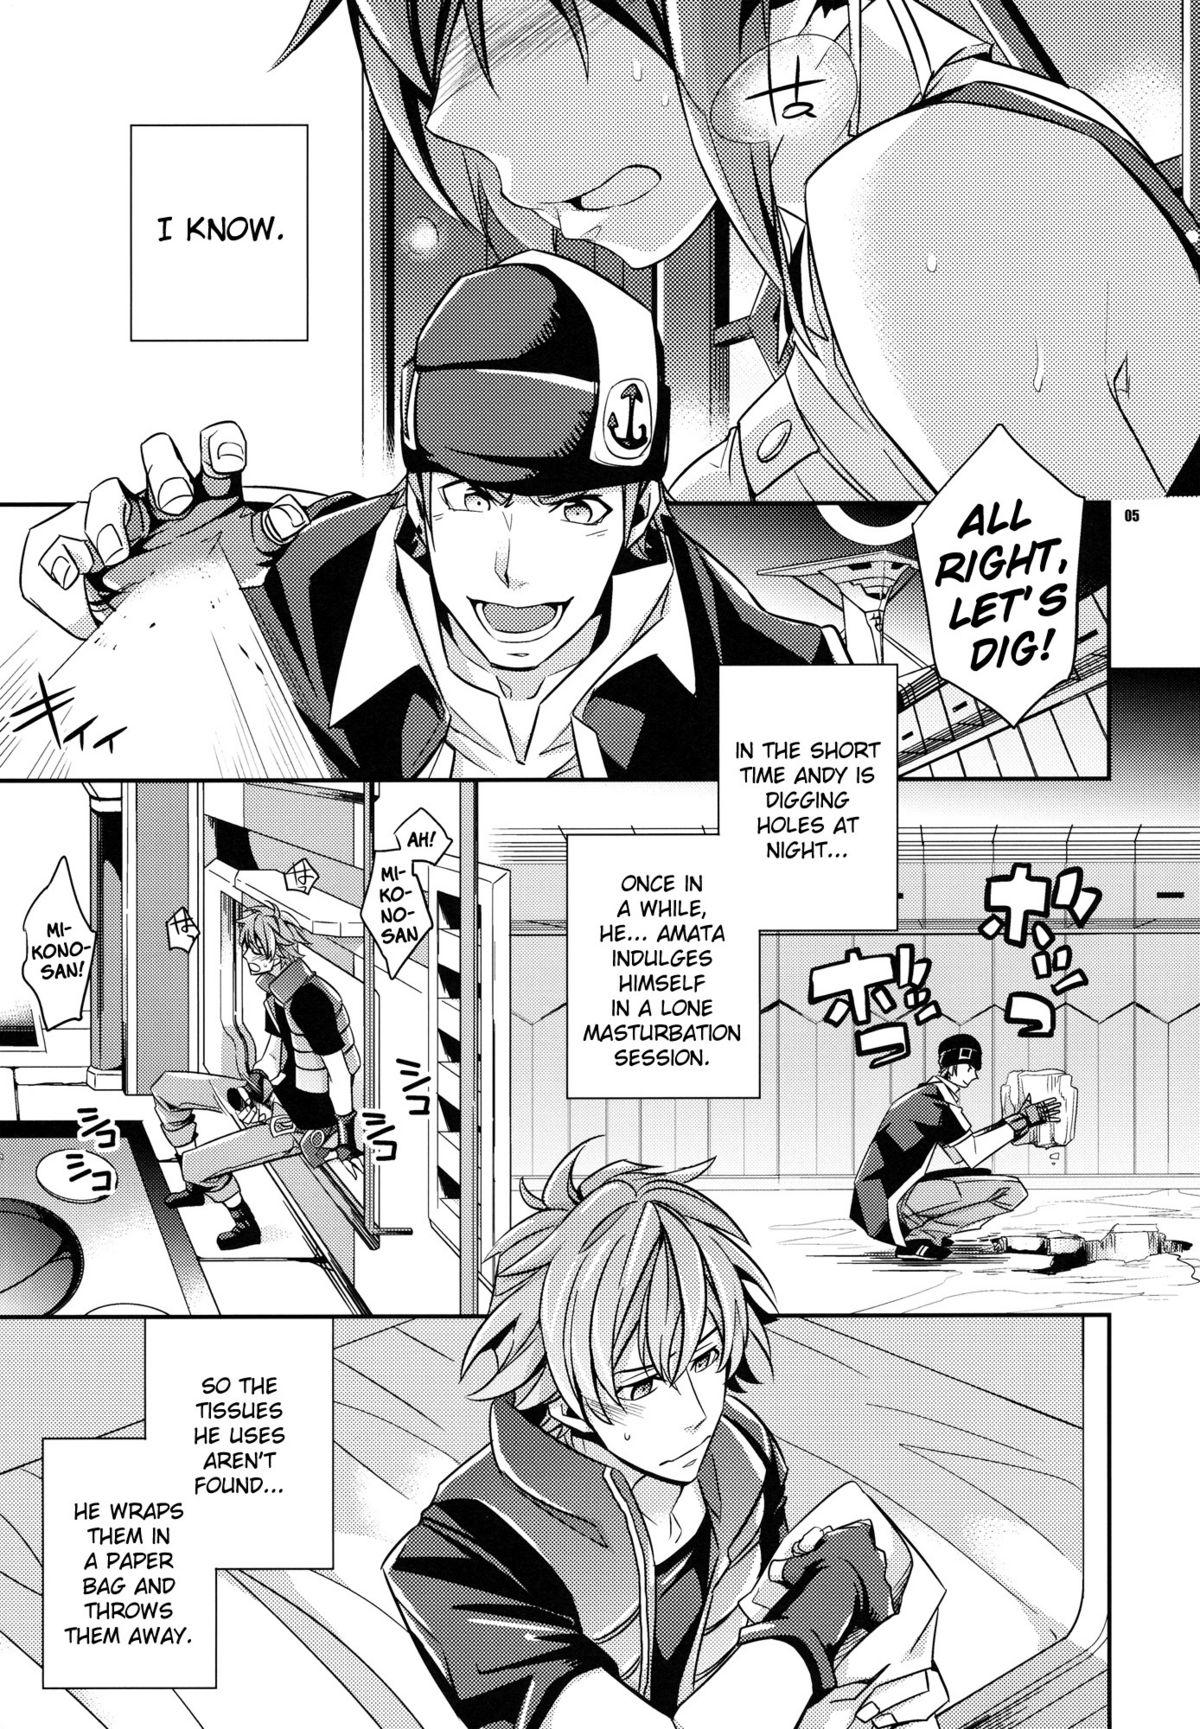 Best Zessica no Koufukuron | Zessica's Theory of Happiness - Aquarion evol Amateur - Page 3